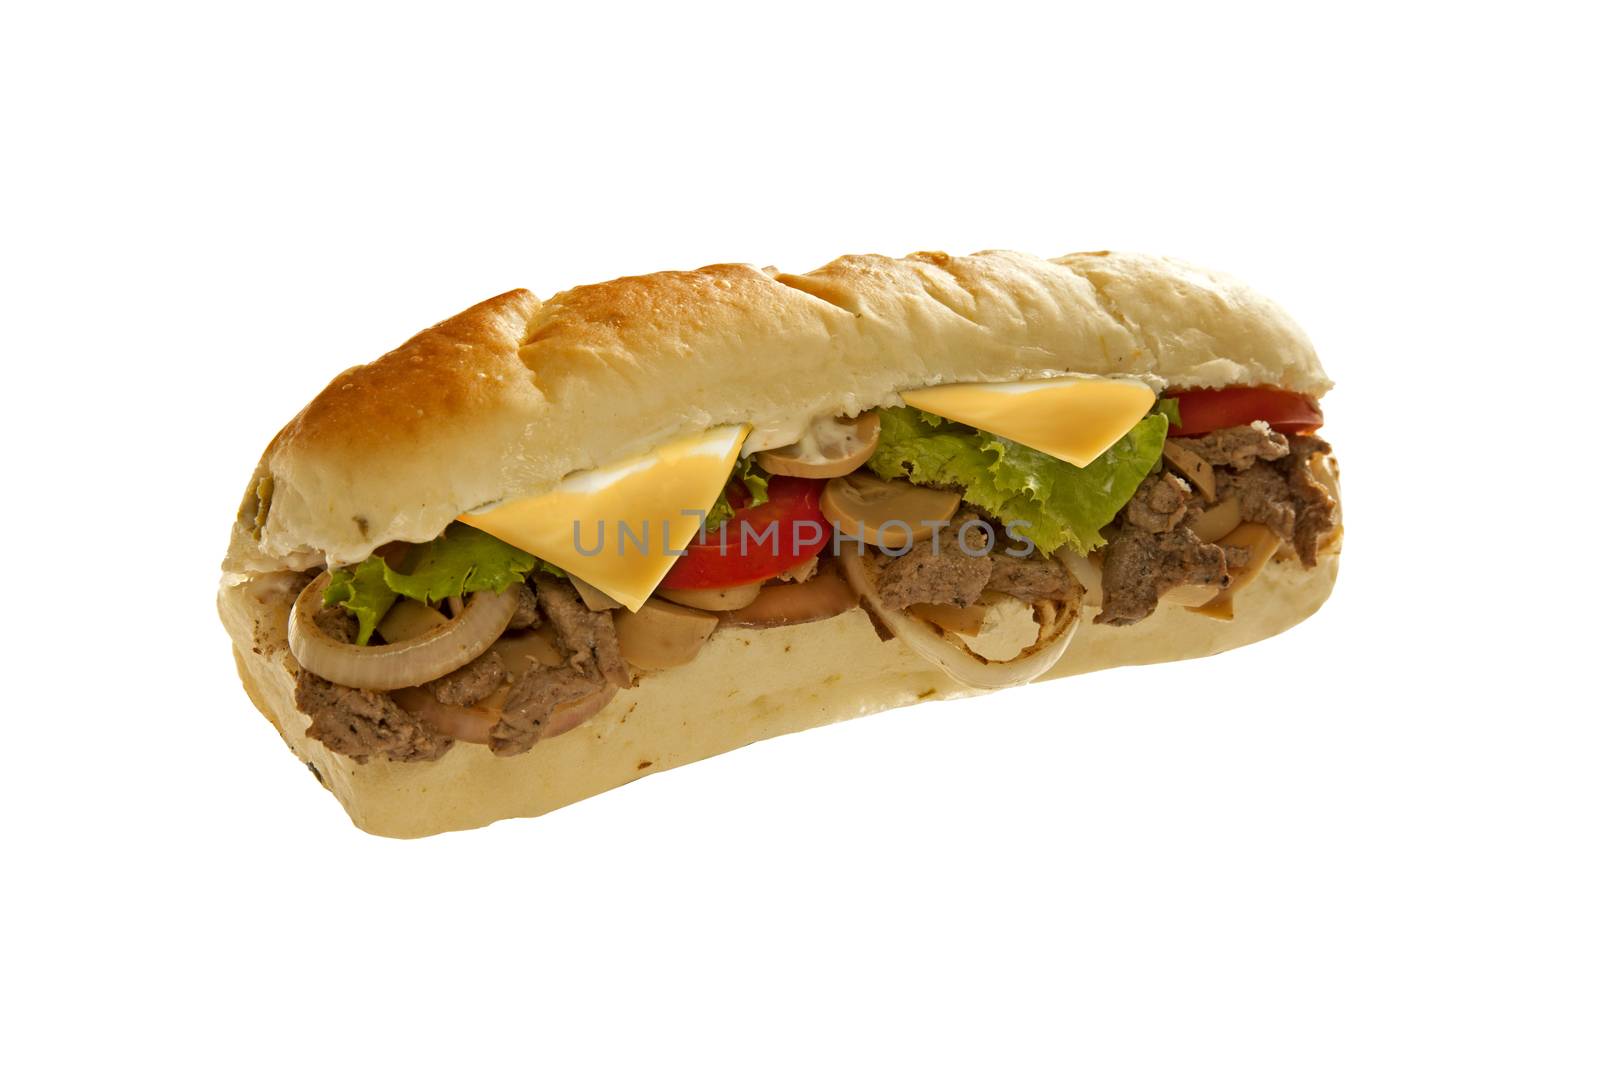 Huge sub sandwich hoagie filled with veggies and meat by haiderazim